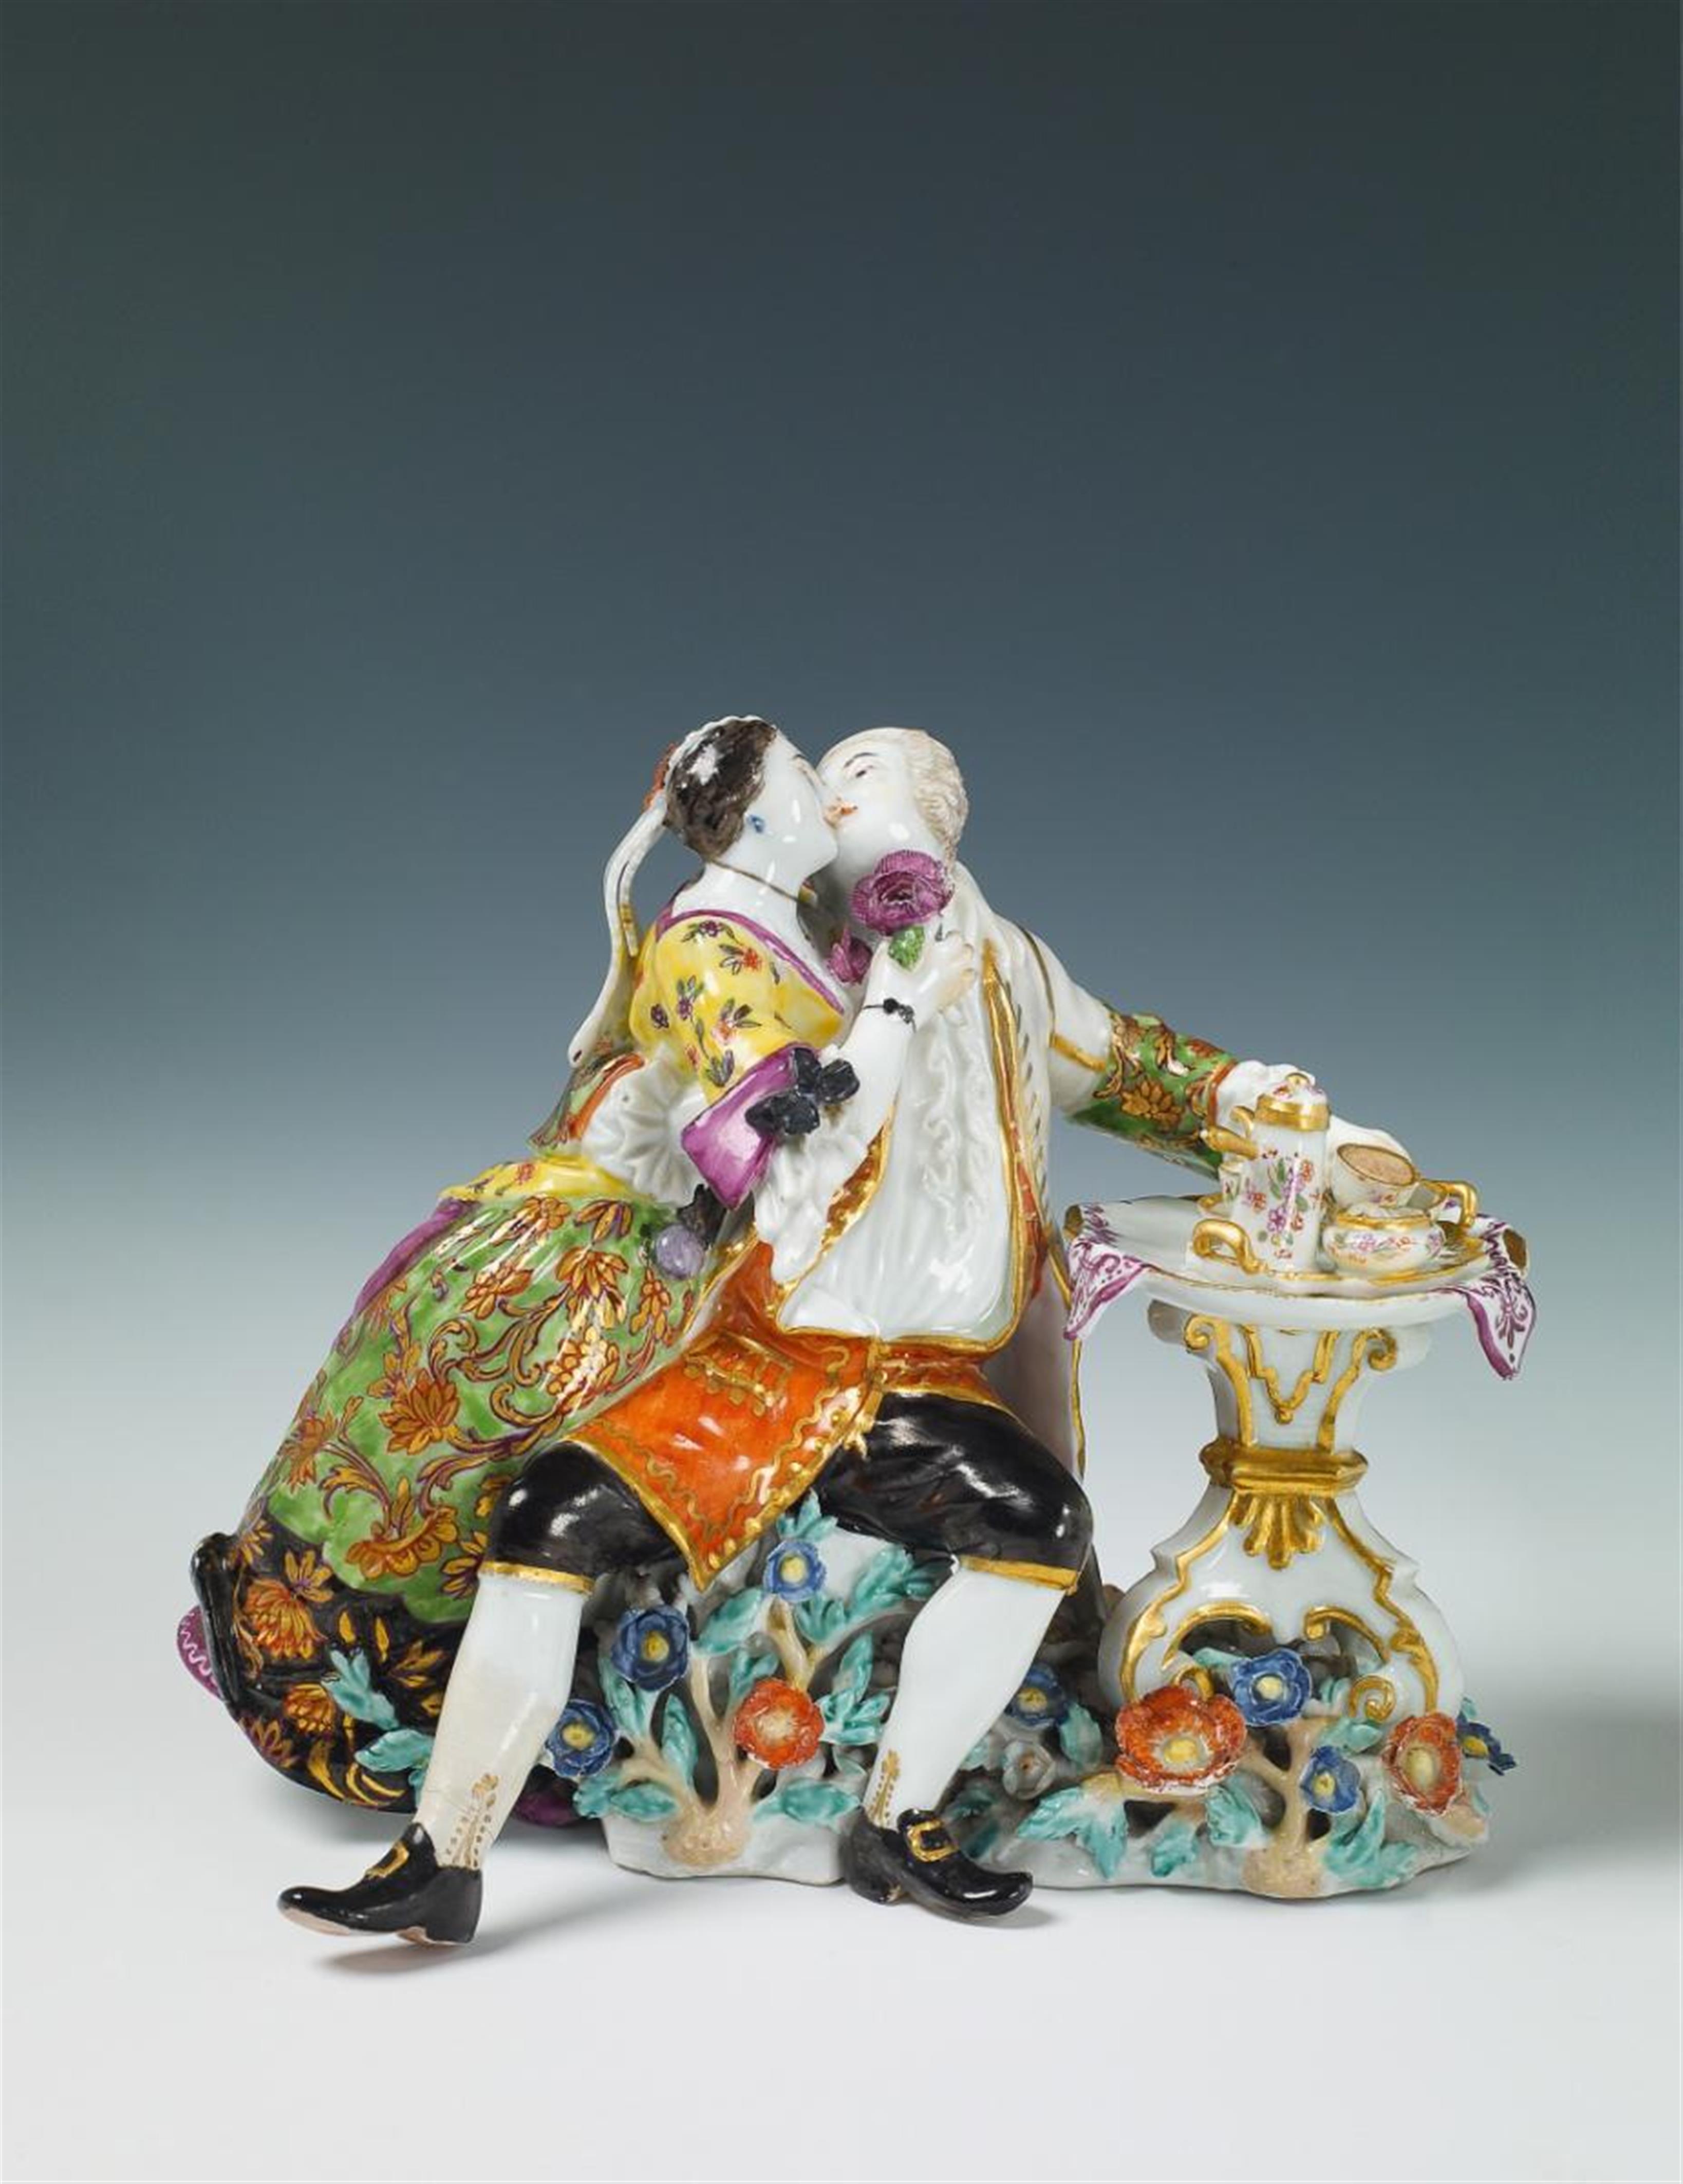 A rare Meissen group showing a finely dressed couple enjoying hot chocolate at a table on a floral base. Liebespaar bei der Schokolade - 